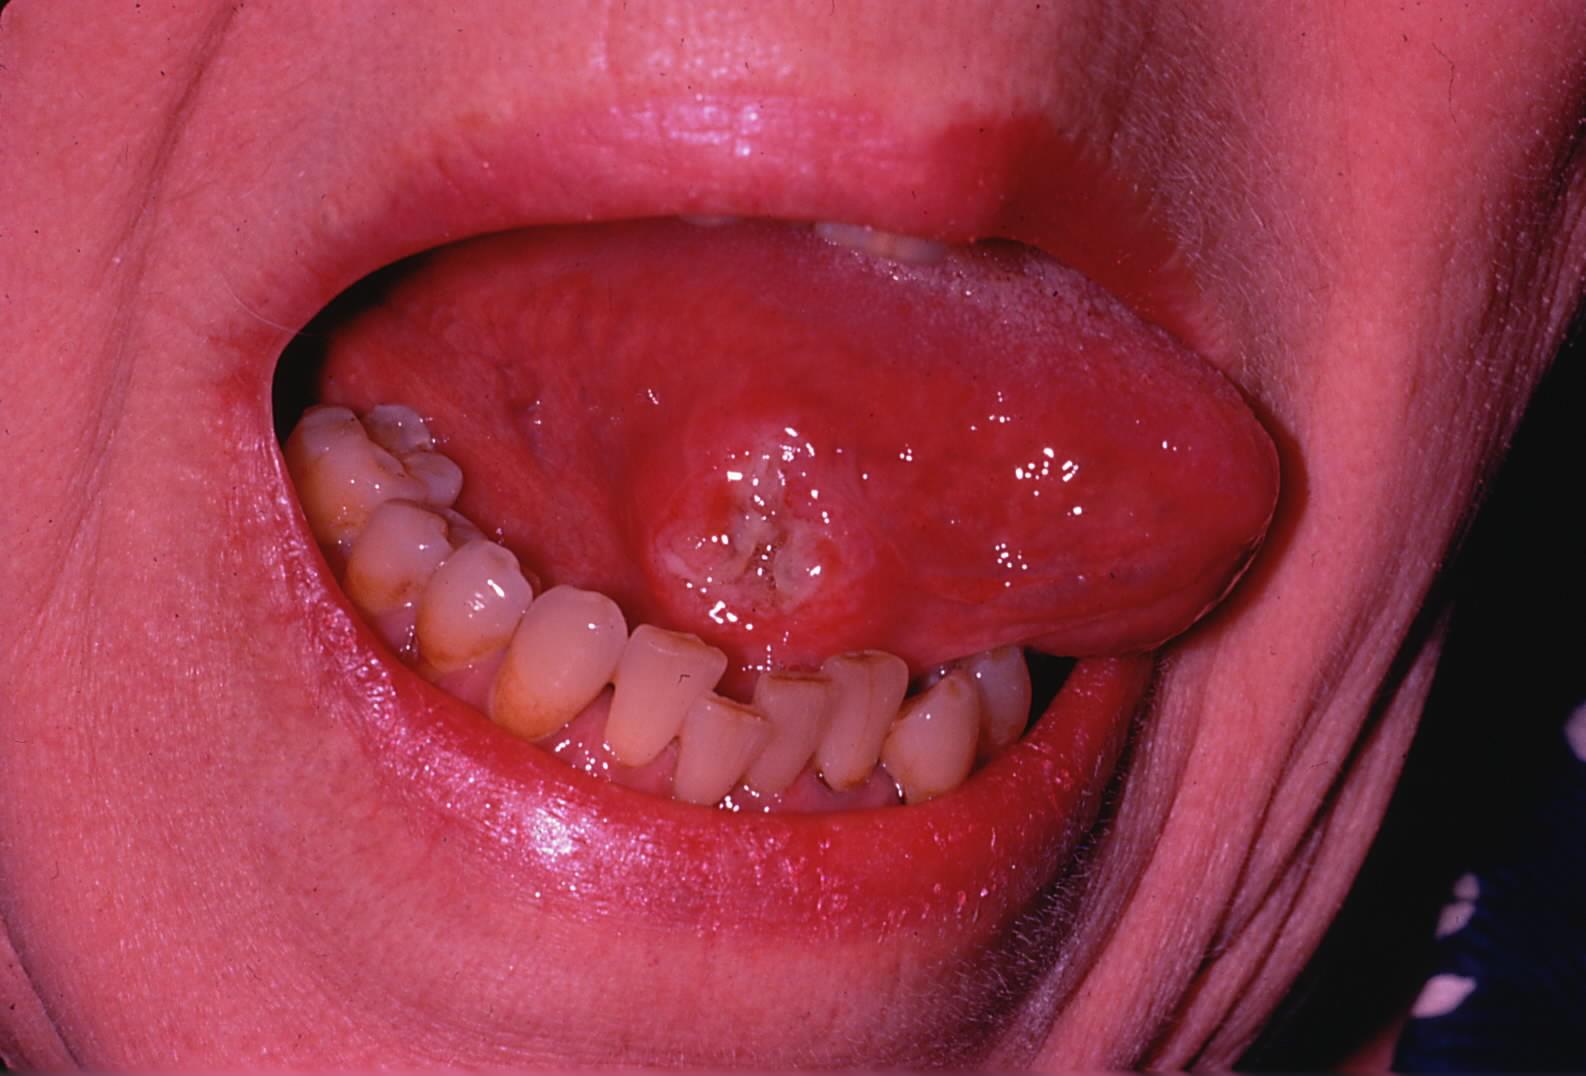 Image of the lateral border of the tongue with deep red, ulcerated lesion with rolled borders